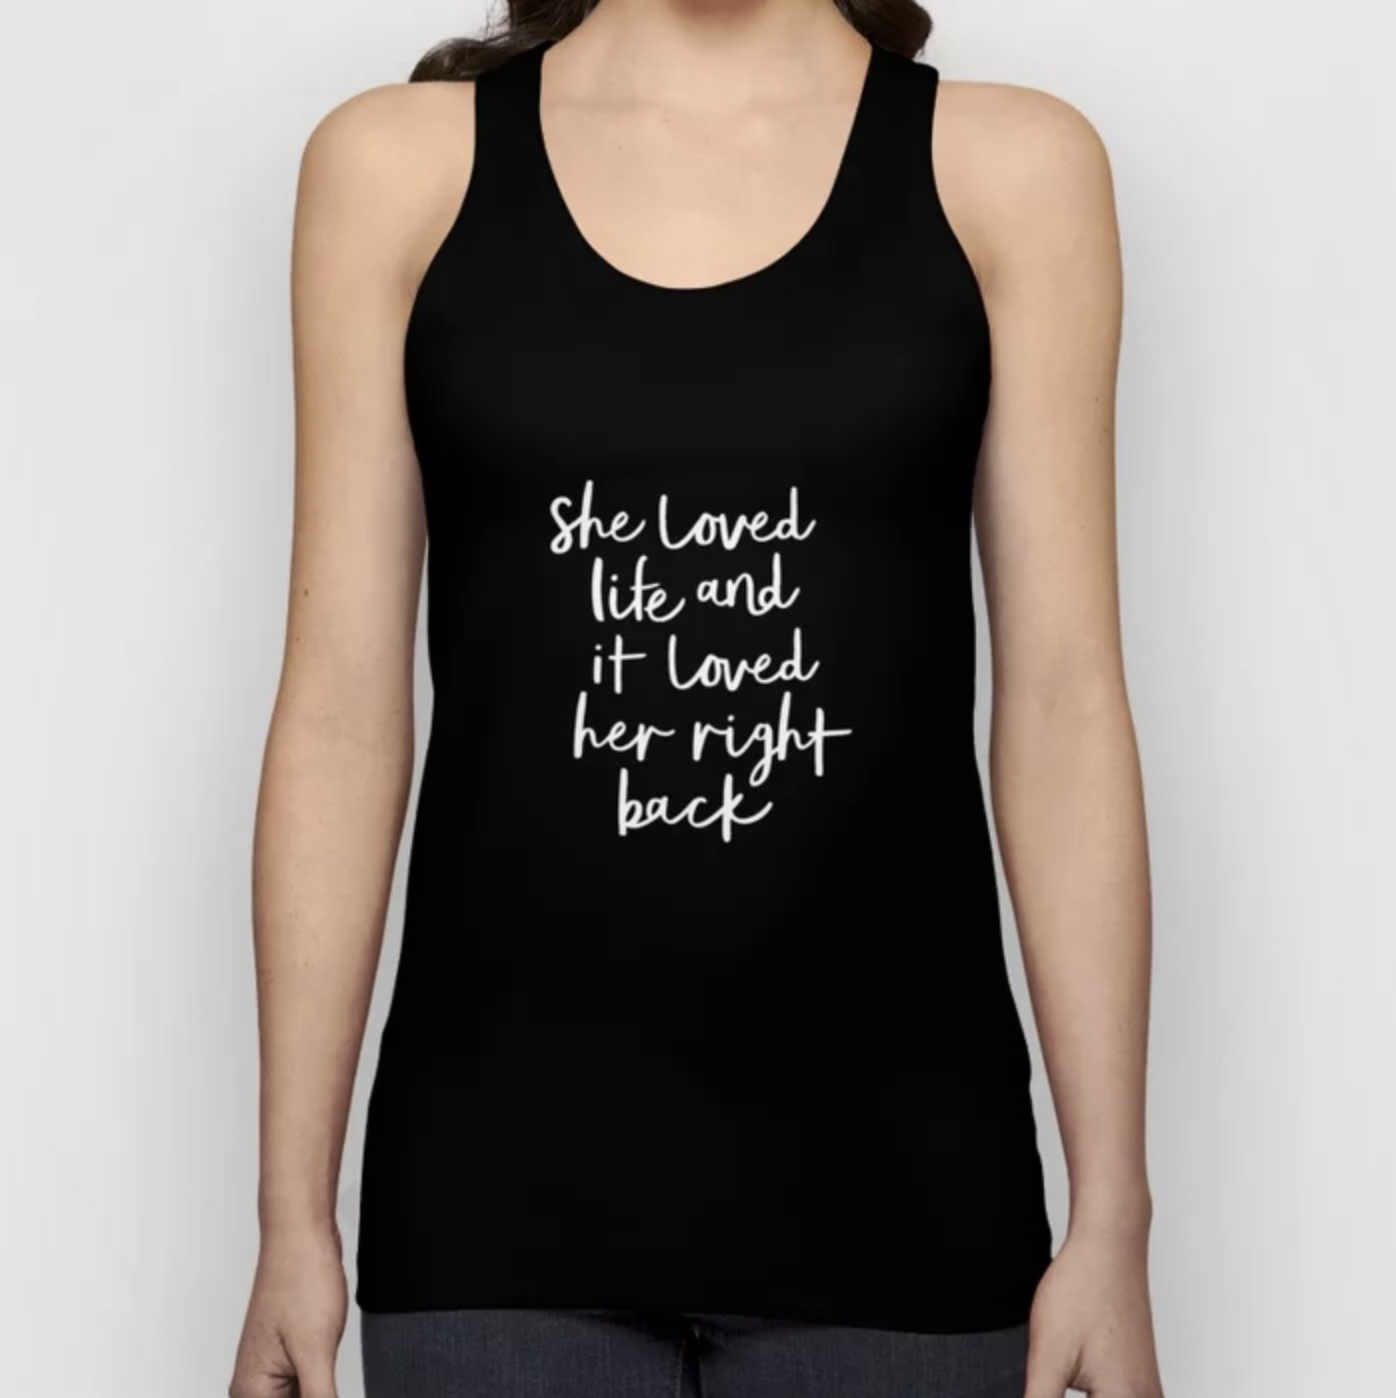 Girlboss Gift Ideas Birthday Gift Inspiration She Loved Life and It Loved Her Right Back Tank Top